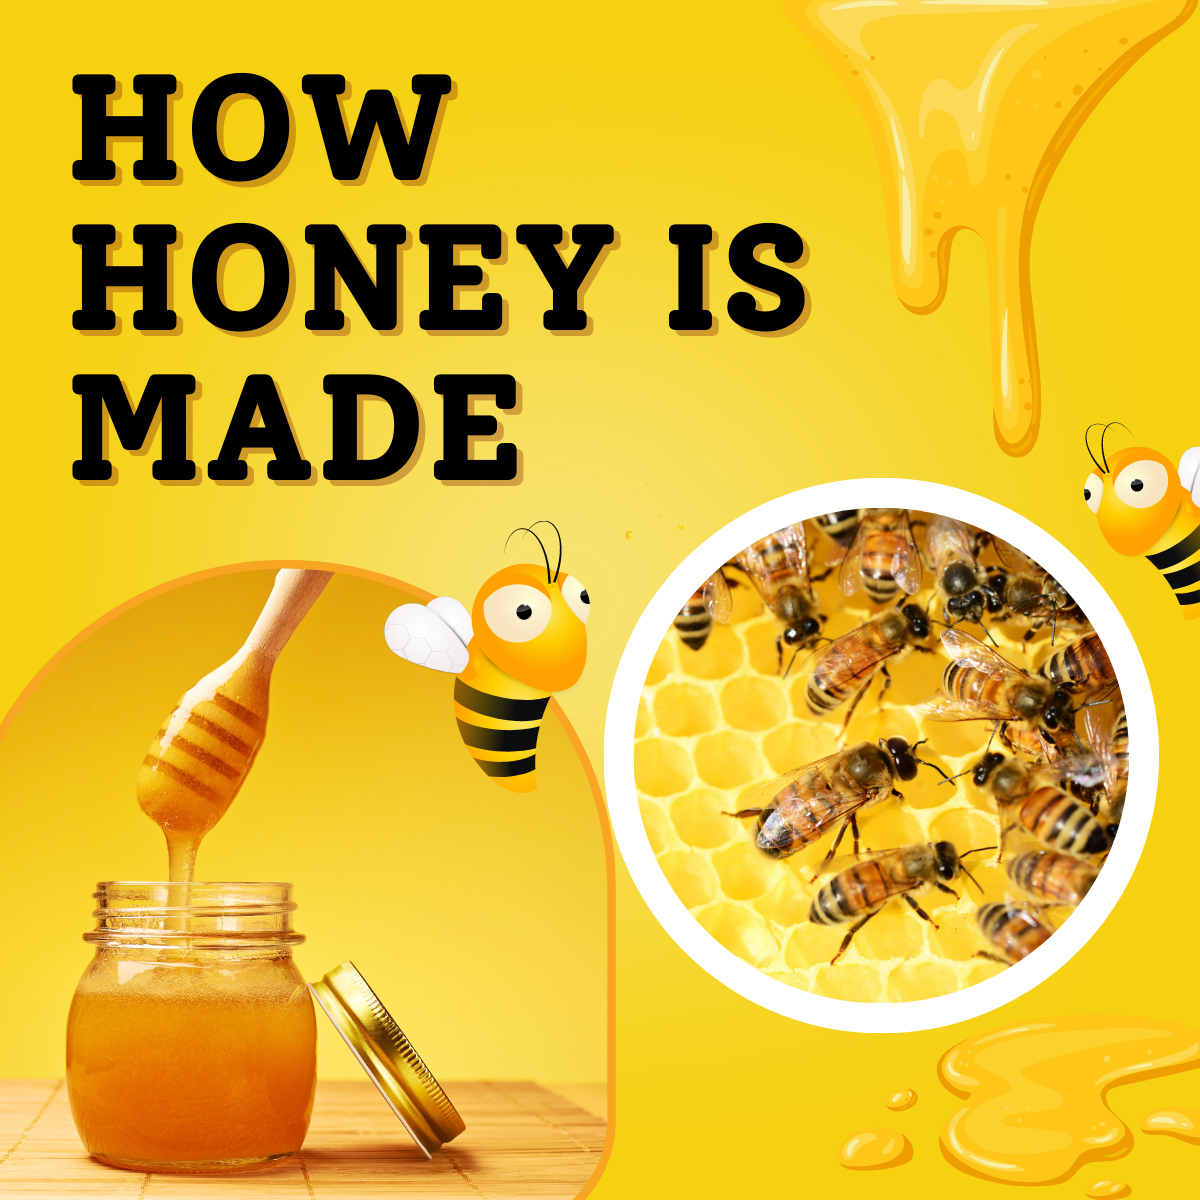 yellow background, white text says How Honey is made. image of honeybees, bottle of honey, and honey dripping down the side of image